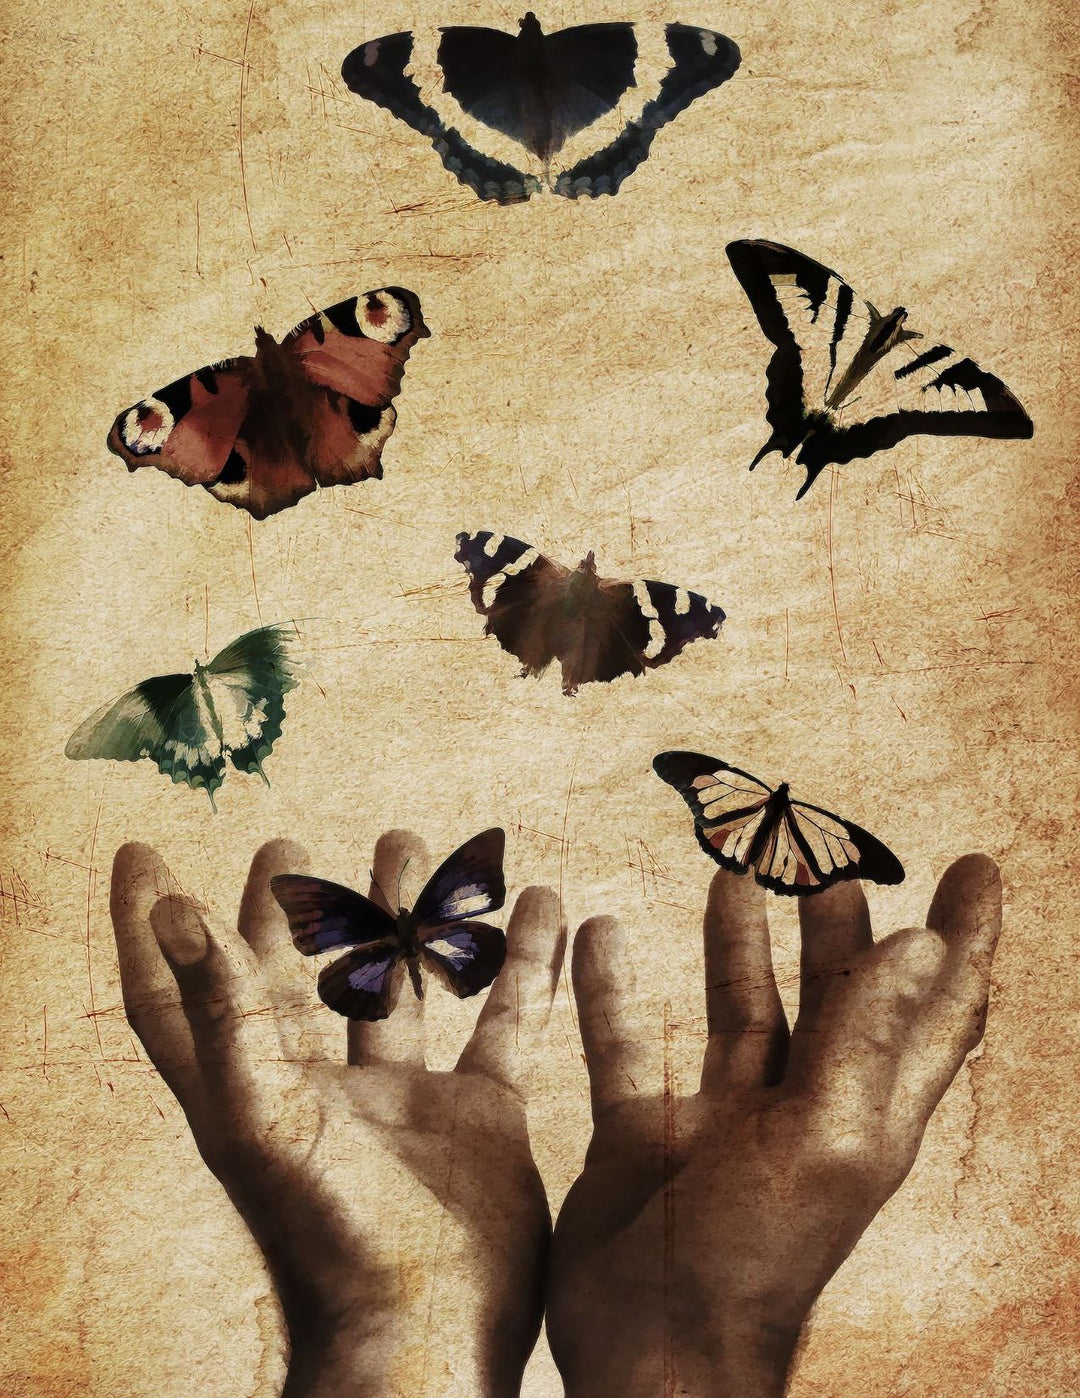 A pair of hands opens to the sky, releasing seven different types of butterly.